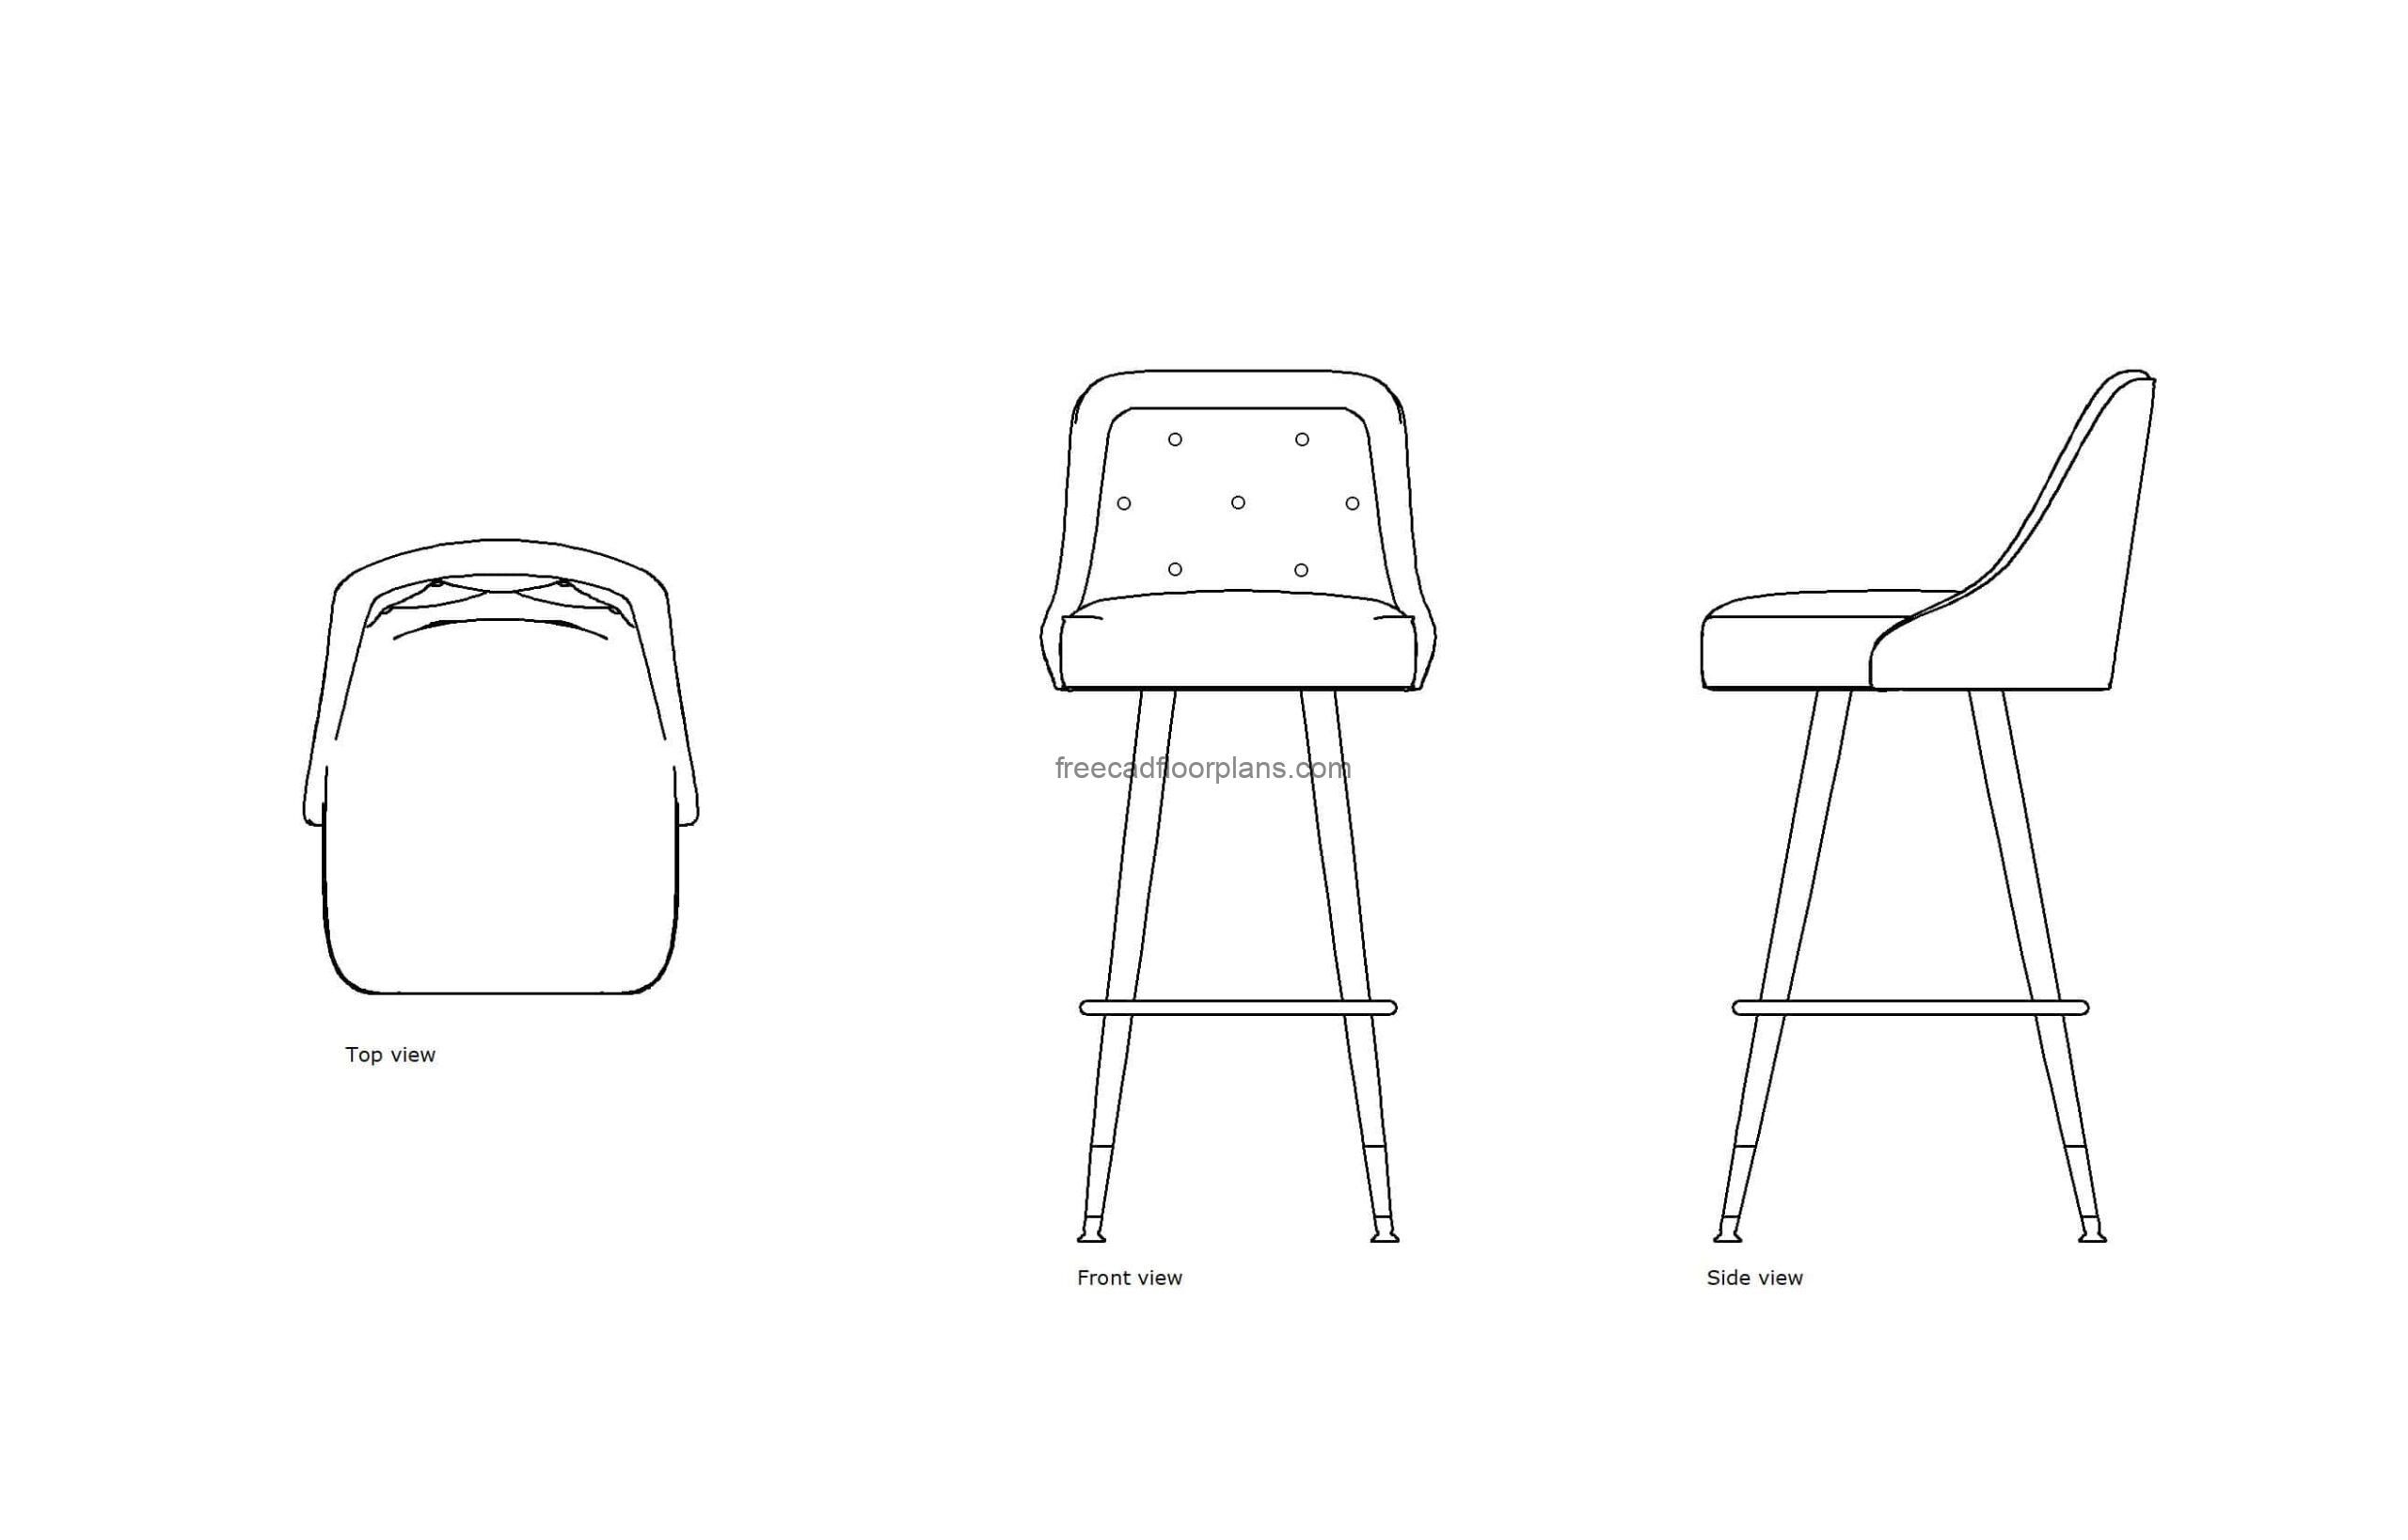 autocad drawing of a bucket bar stool, 2d plan and elevation dwg file free for download